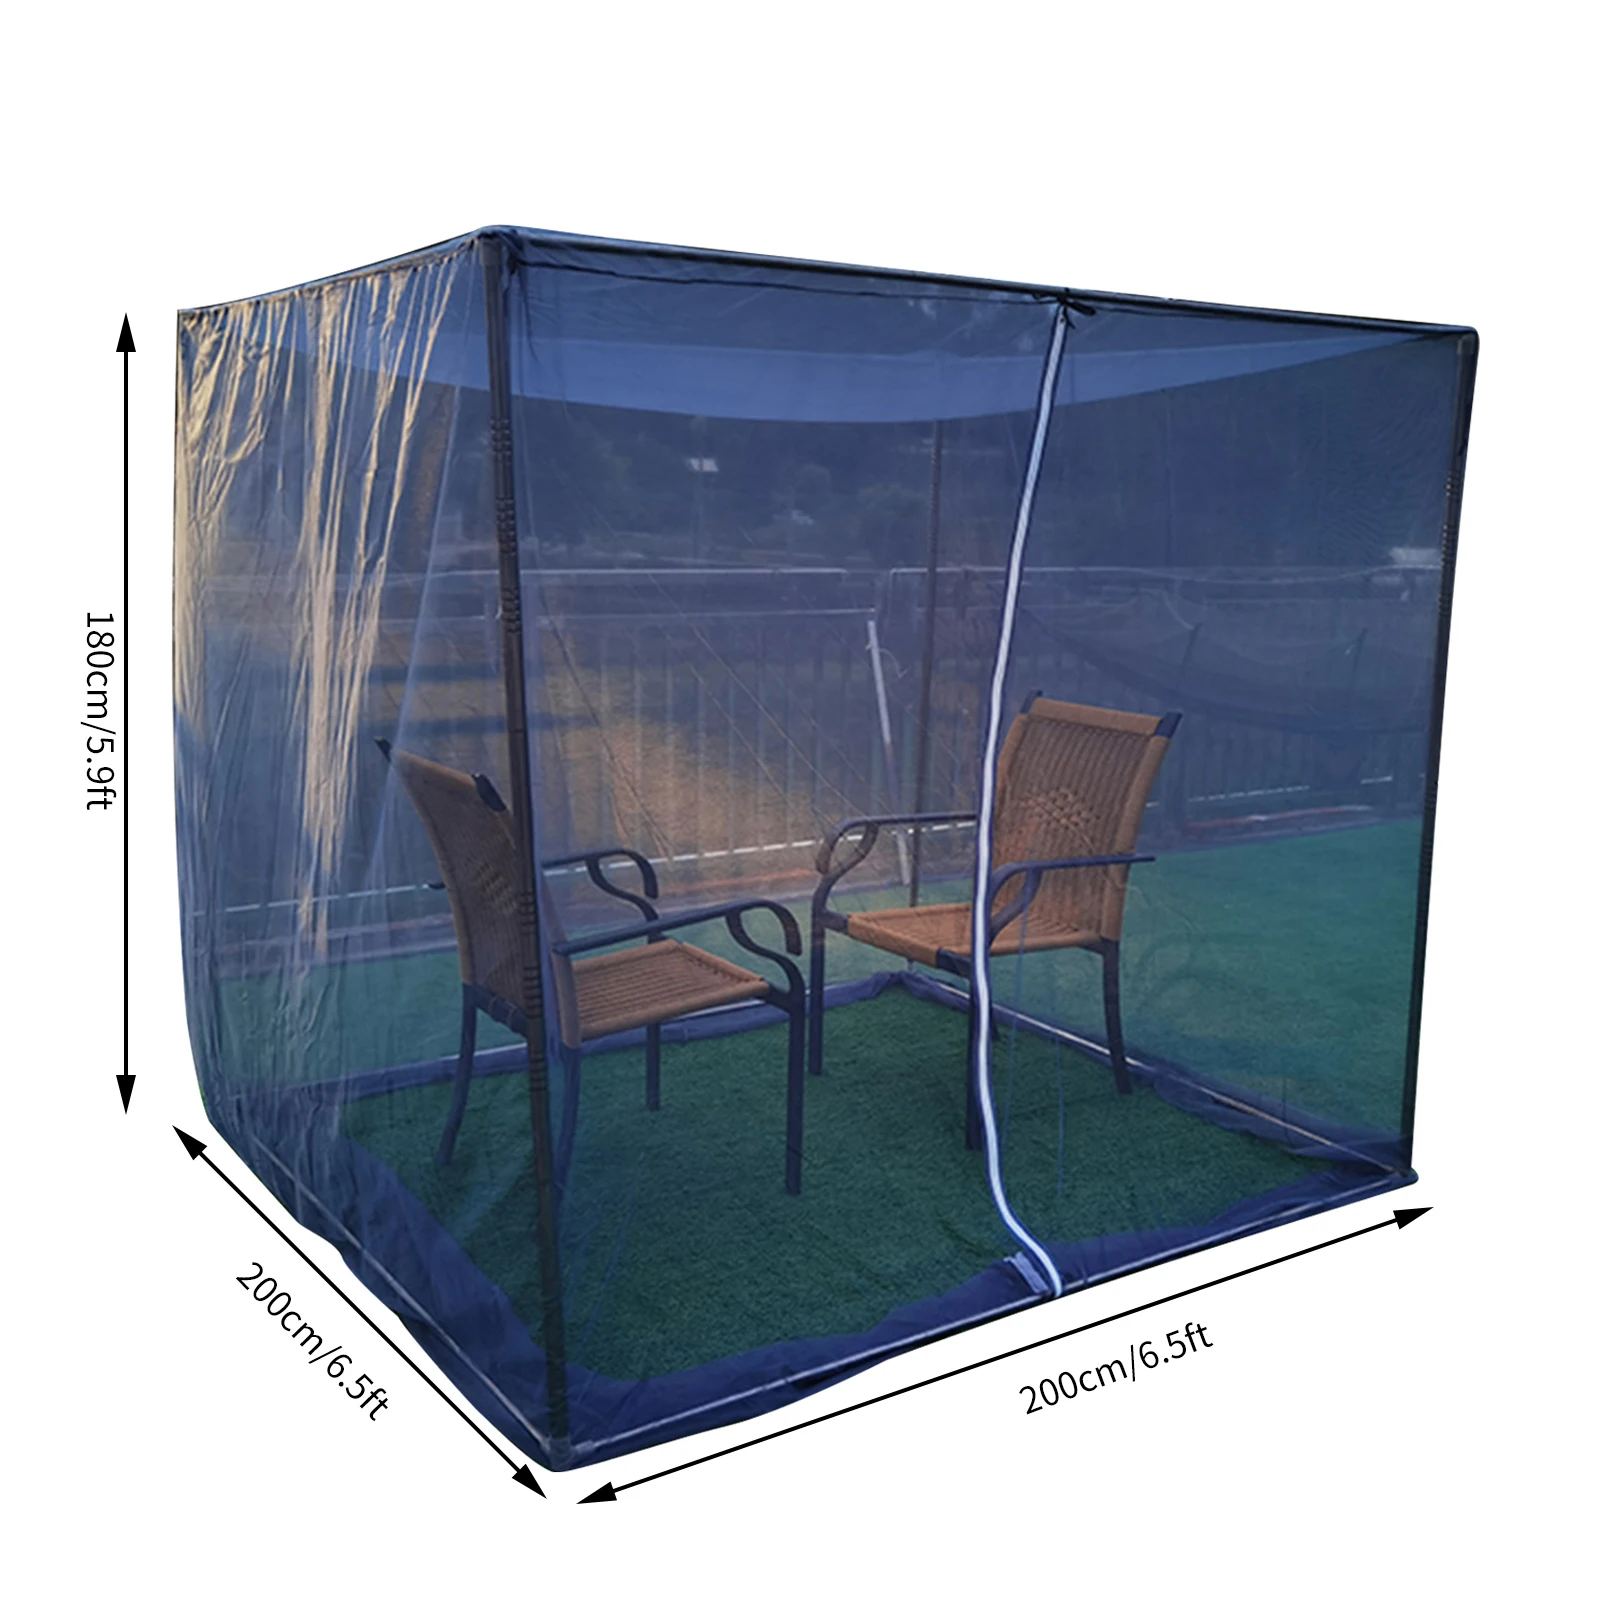 Gazebo Tent With Mosquito Netting And Bracket Outdoor Canopy With Zipper Door Shelter Sun Shade For Patio Garden Backyard Deck